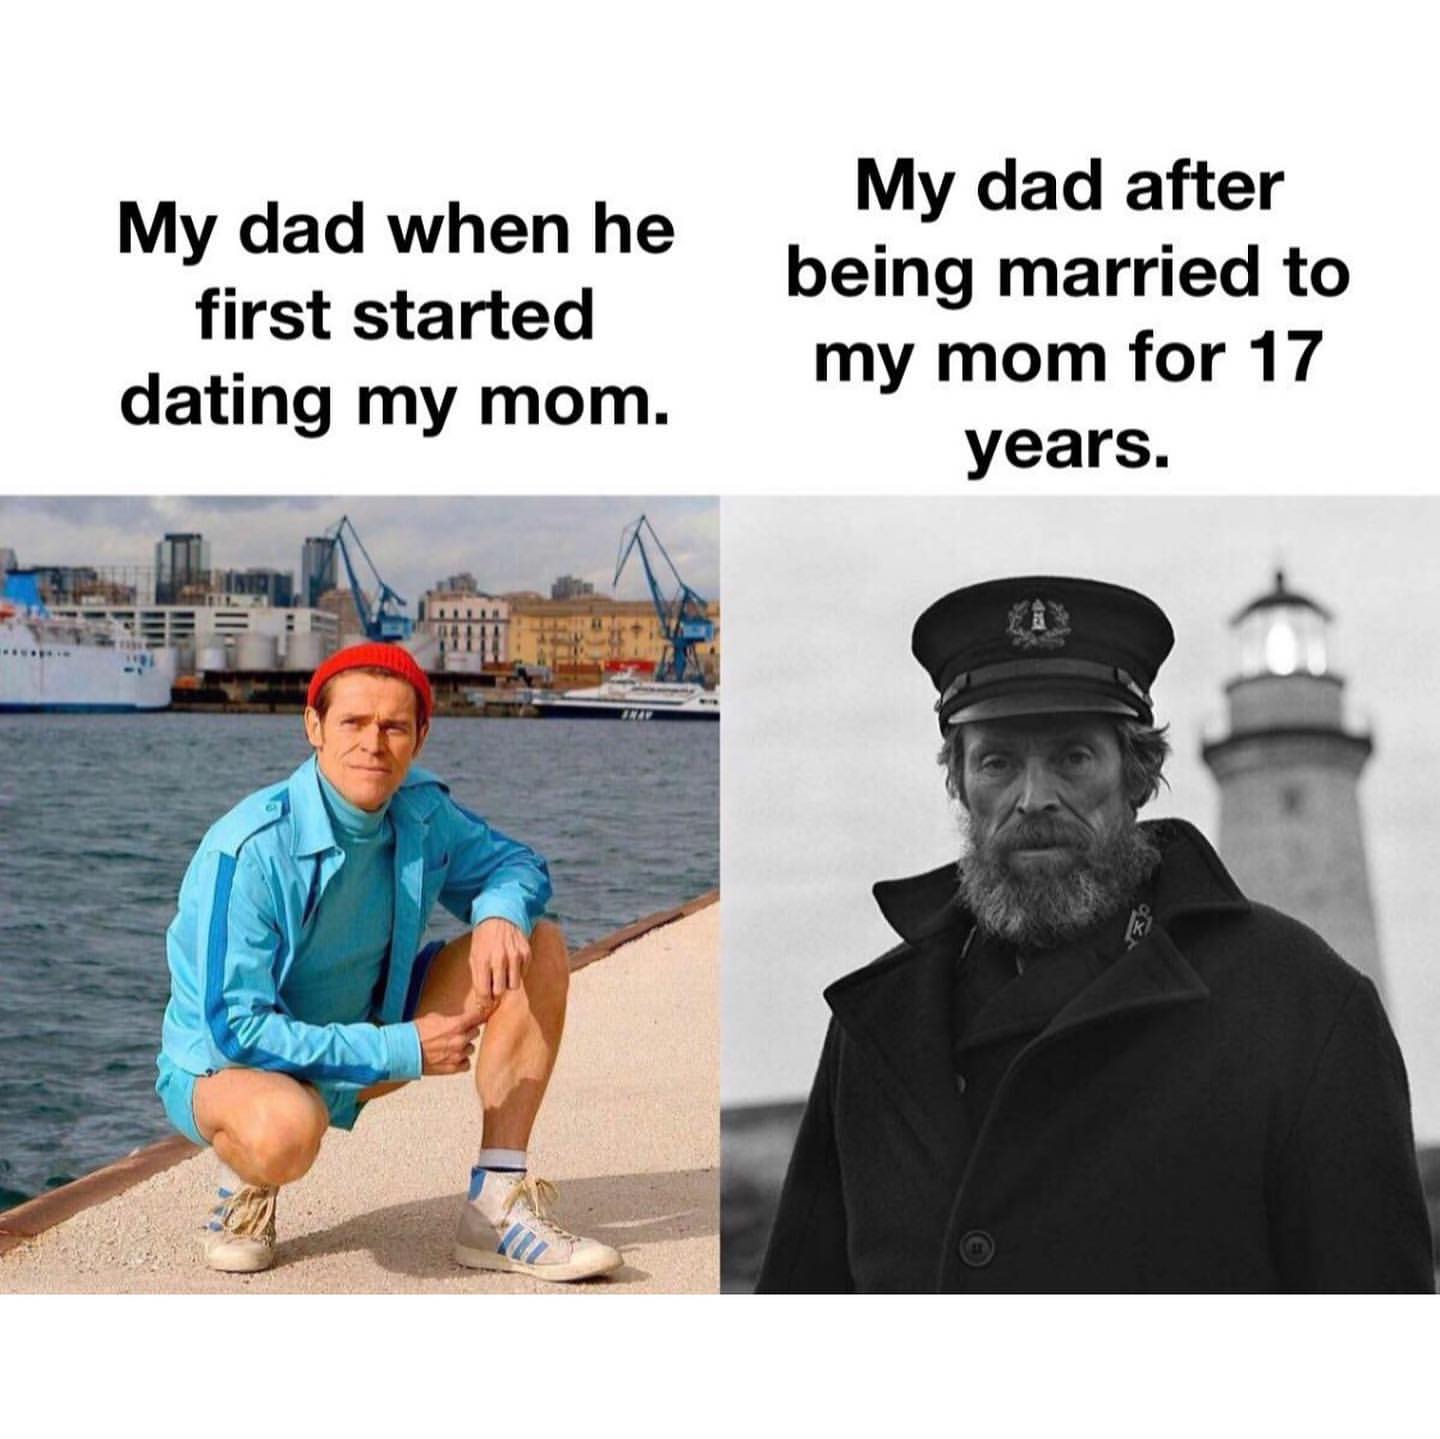 My dad when he first started dating my mom. My dad after being married to my mom for 17 years.